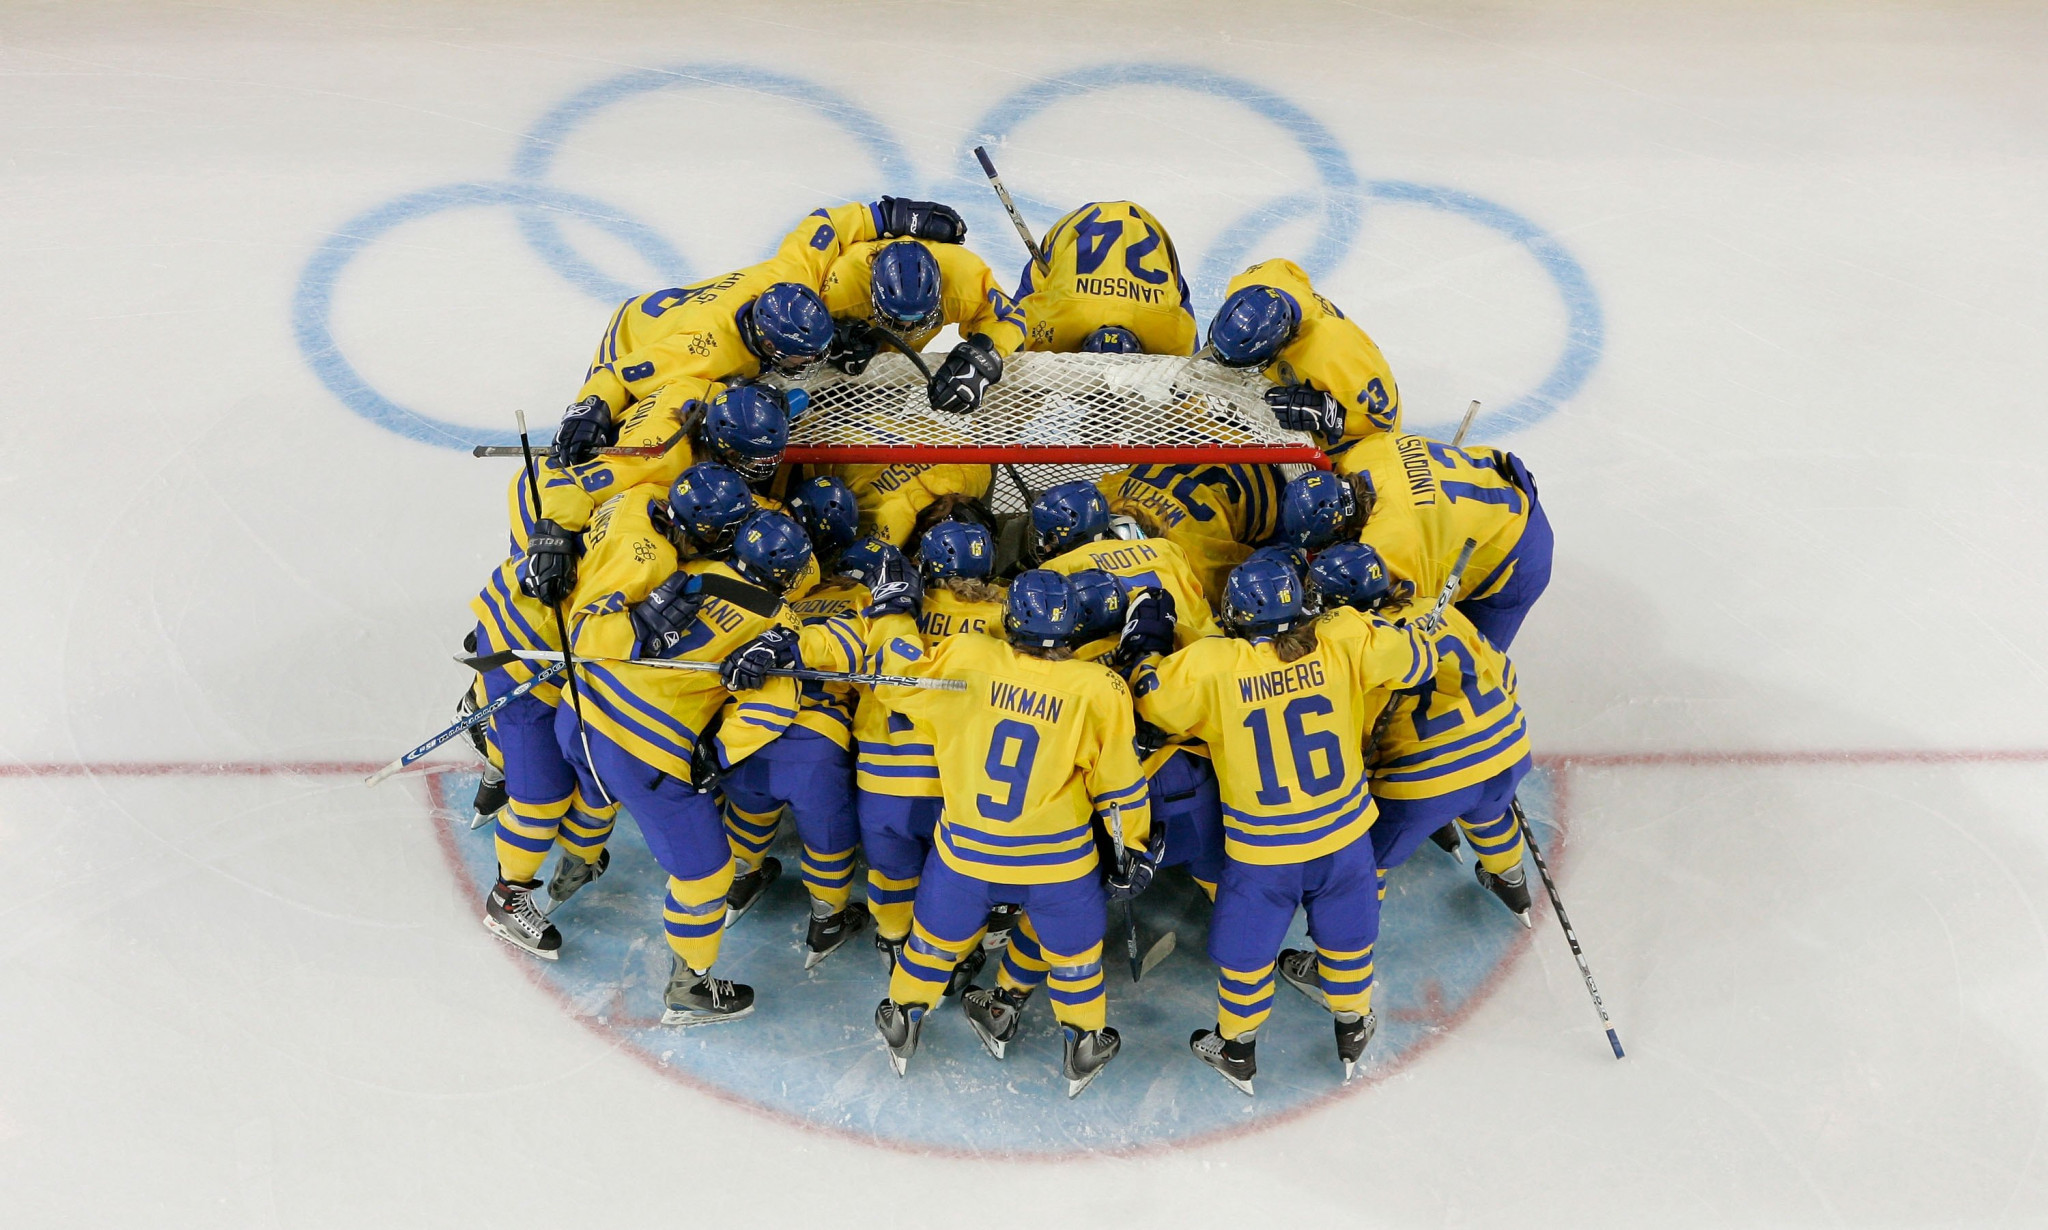 Sweden's ice hockey team are a win away from qualifying for Beijing 2022 ©Getty Images